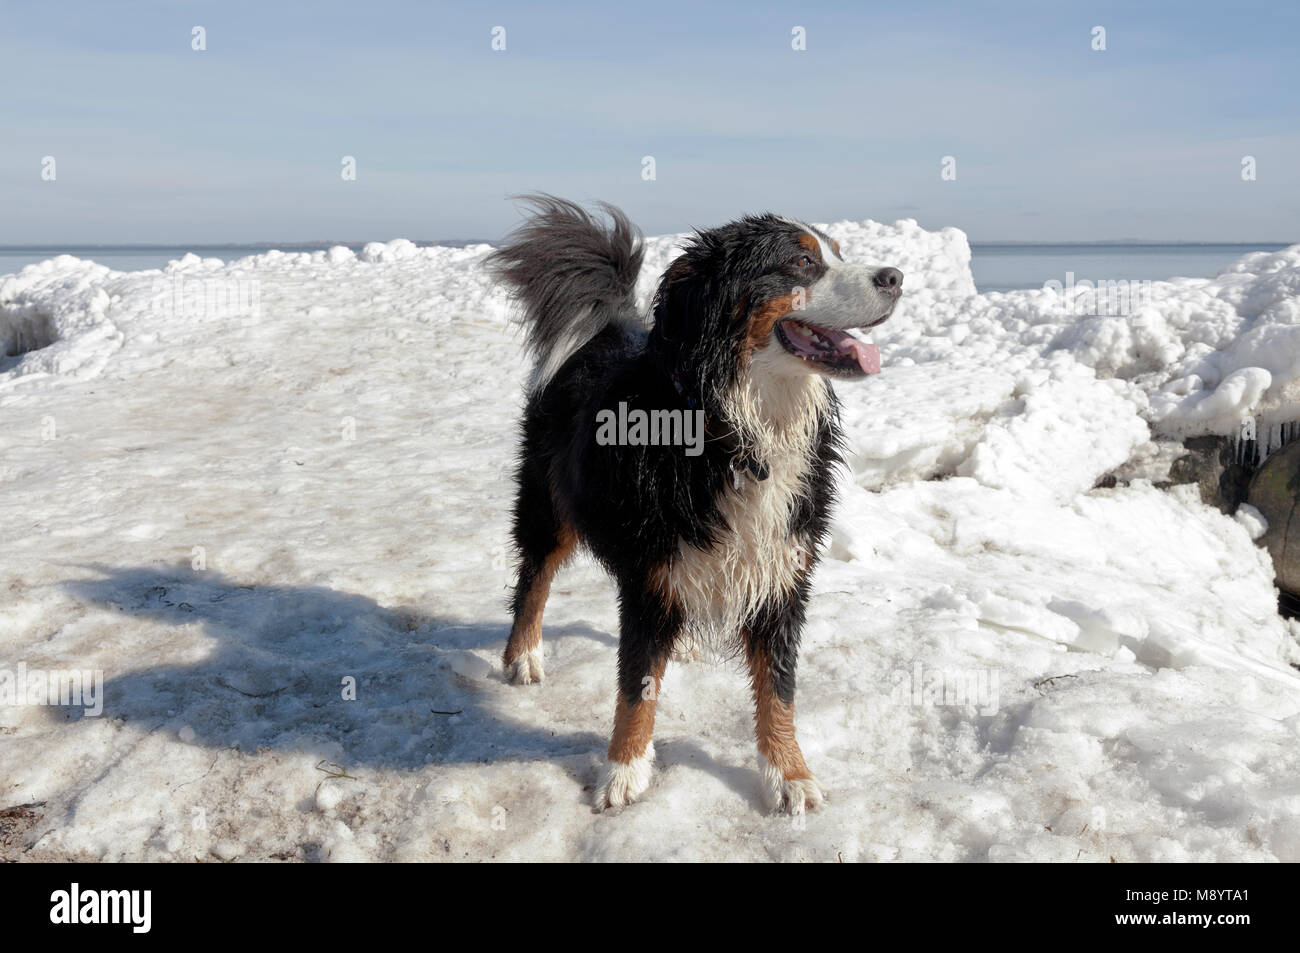 A Bernese Mountain Dog enjoys a sunny spring day with melting ice after an extremely cold spell at Oresund, the Sound, north of Copenhagen, Denmark. Stock Photo